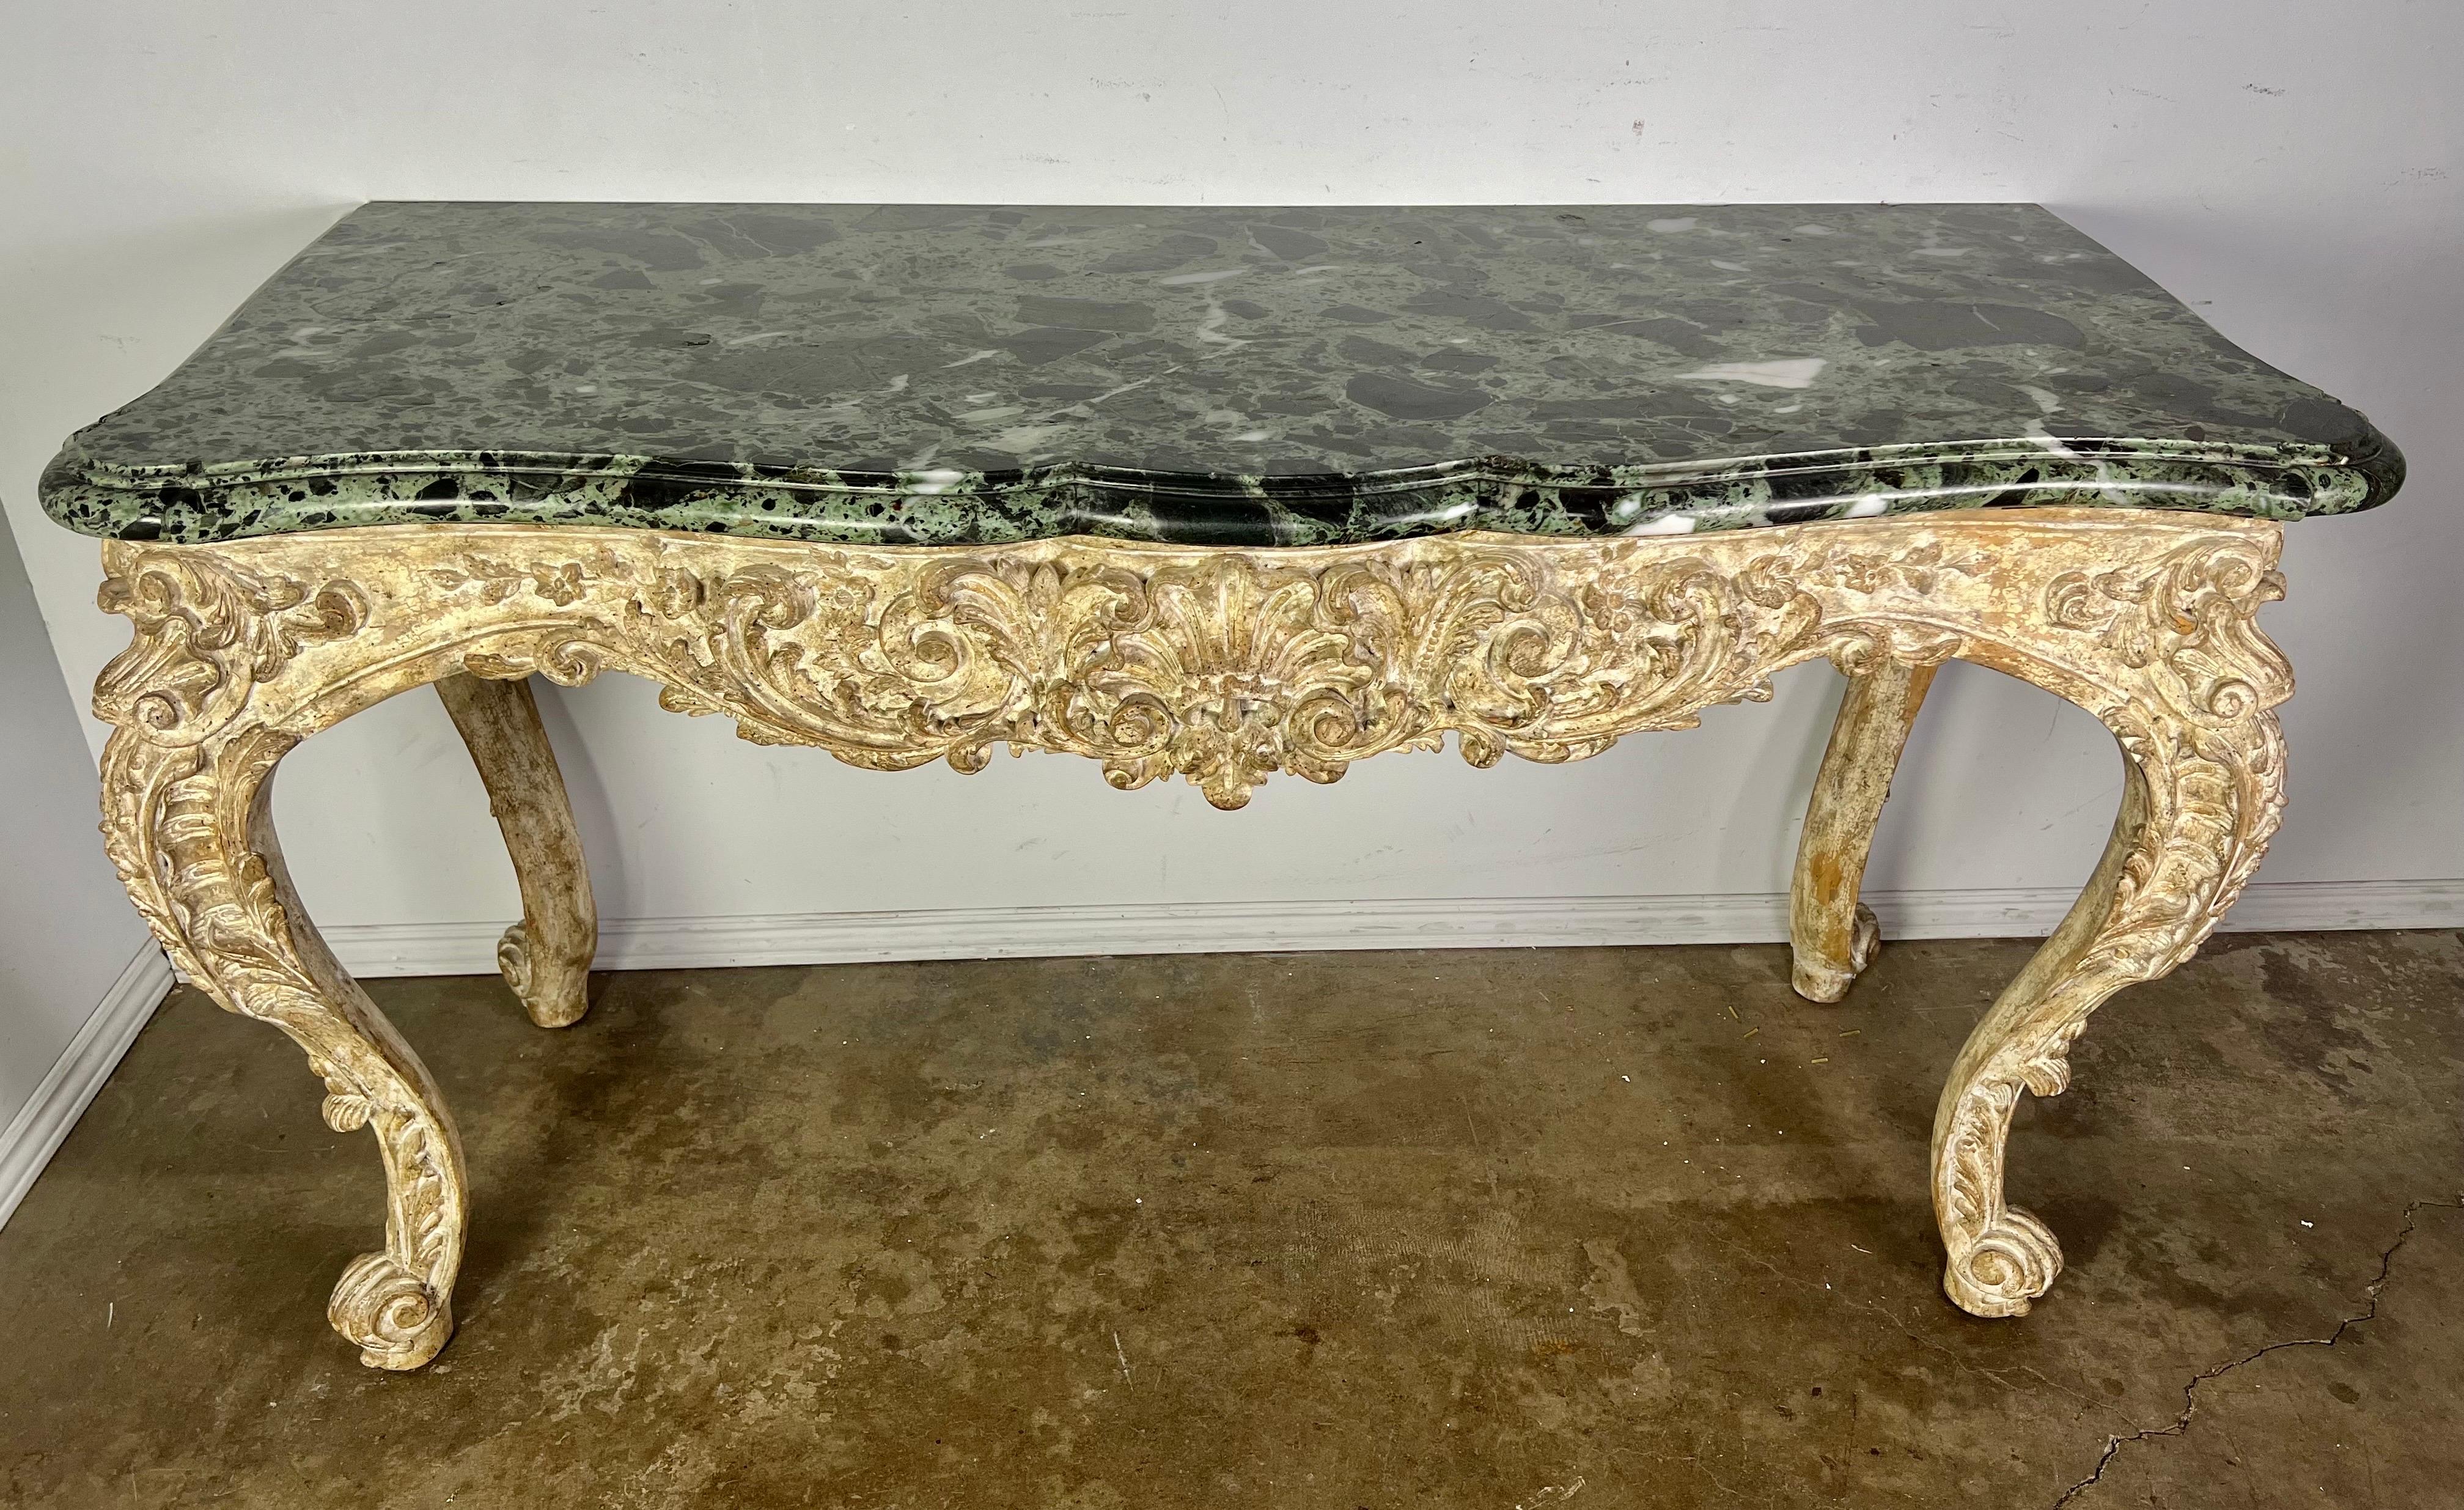 French carved Louis XV style console in a distressed painted finish. The marble top is 2